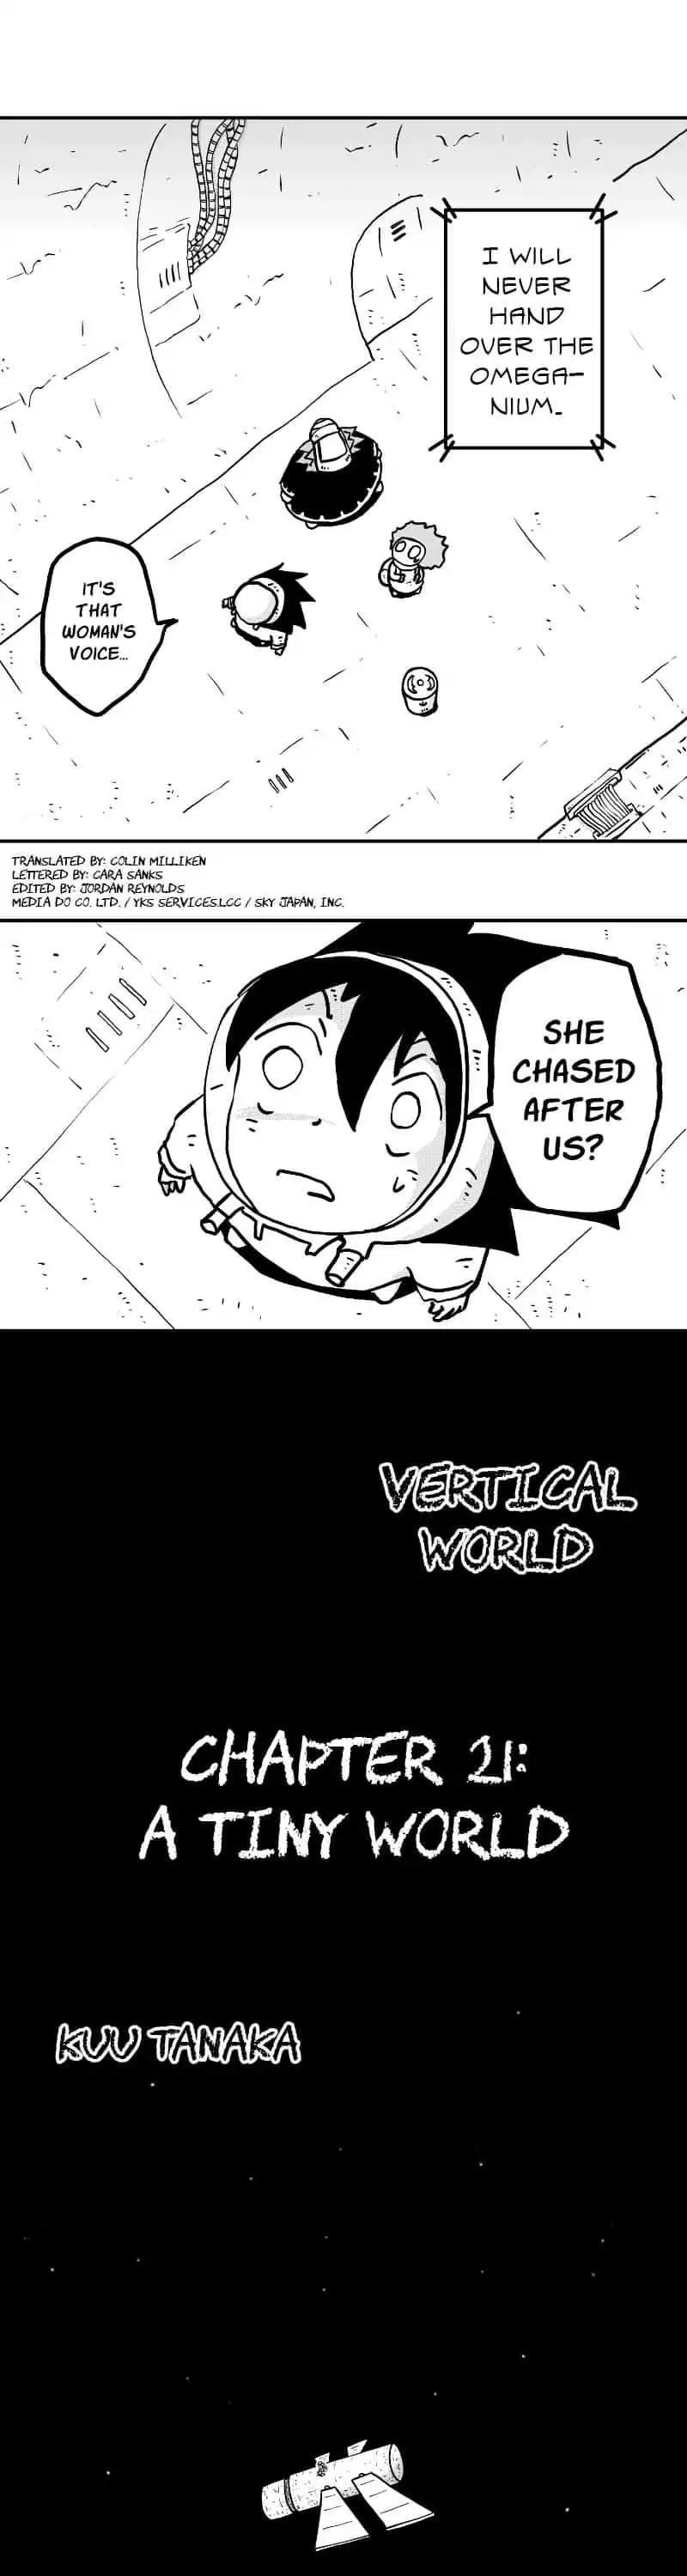 The Vertical World Chapter 21: